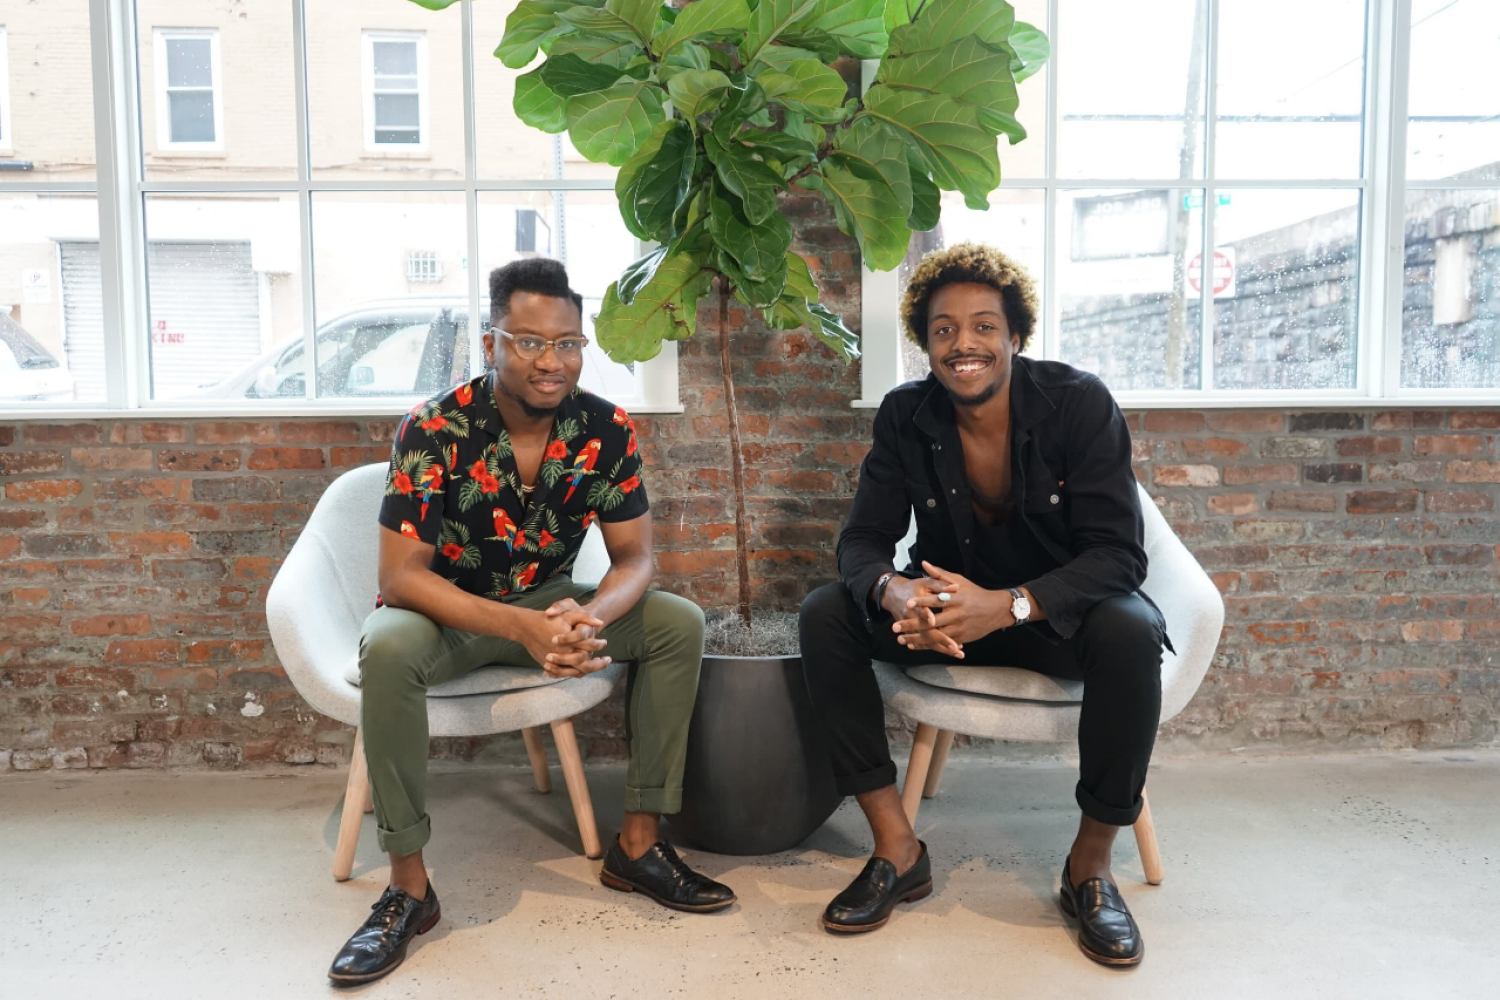 Ivan Alo and LaDante McMillon sitting in their office in front of a large plant